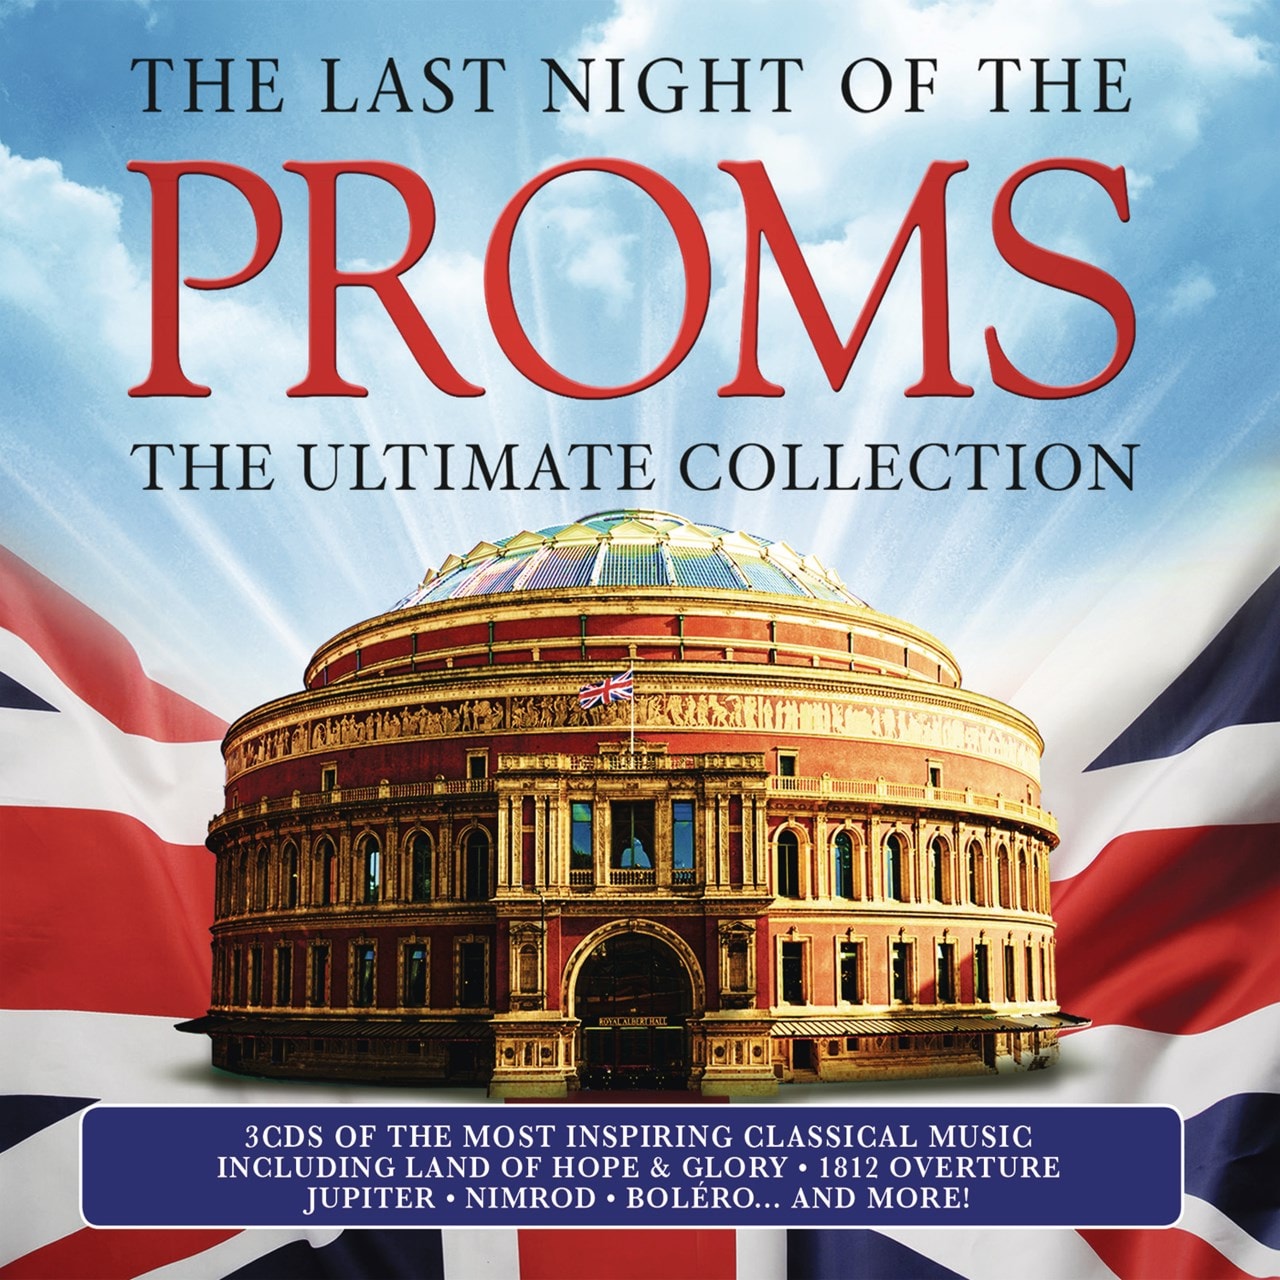 The Last Night of the Proms The Ultimate Collection CD Album Free